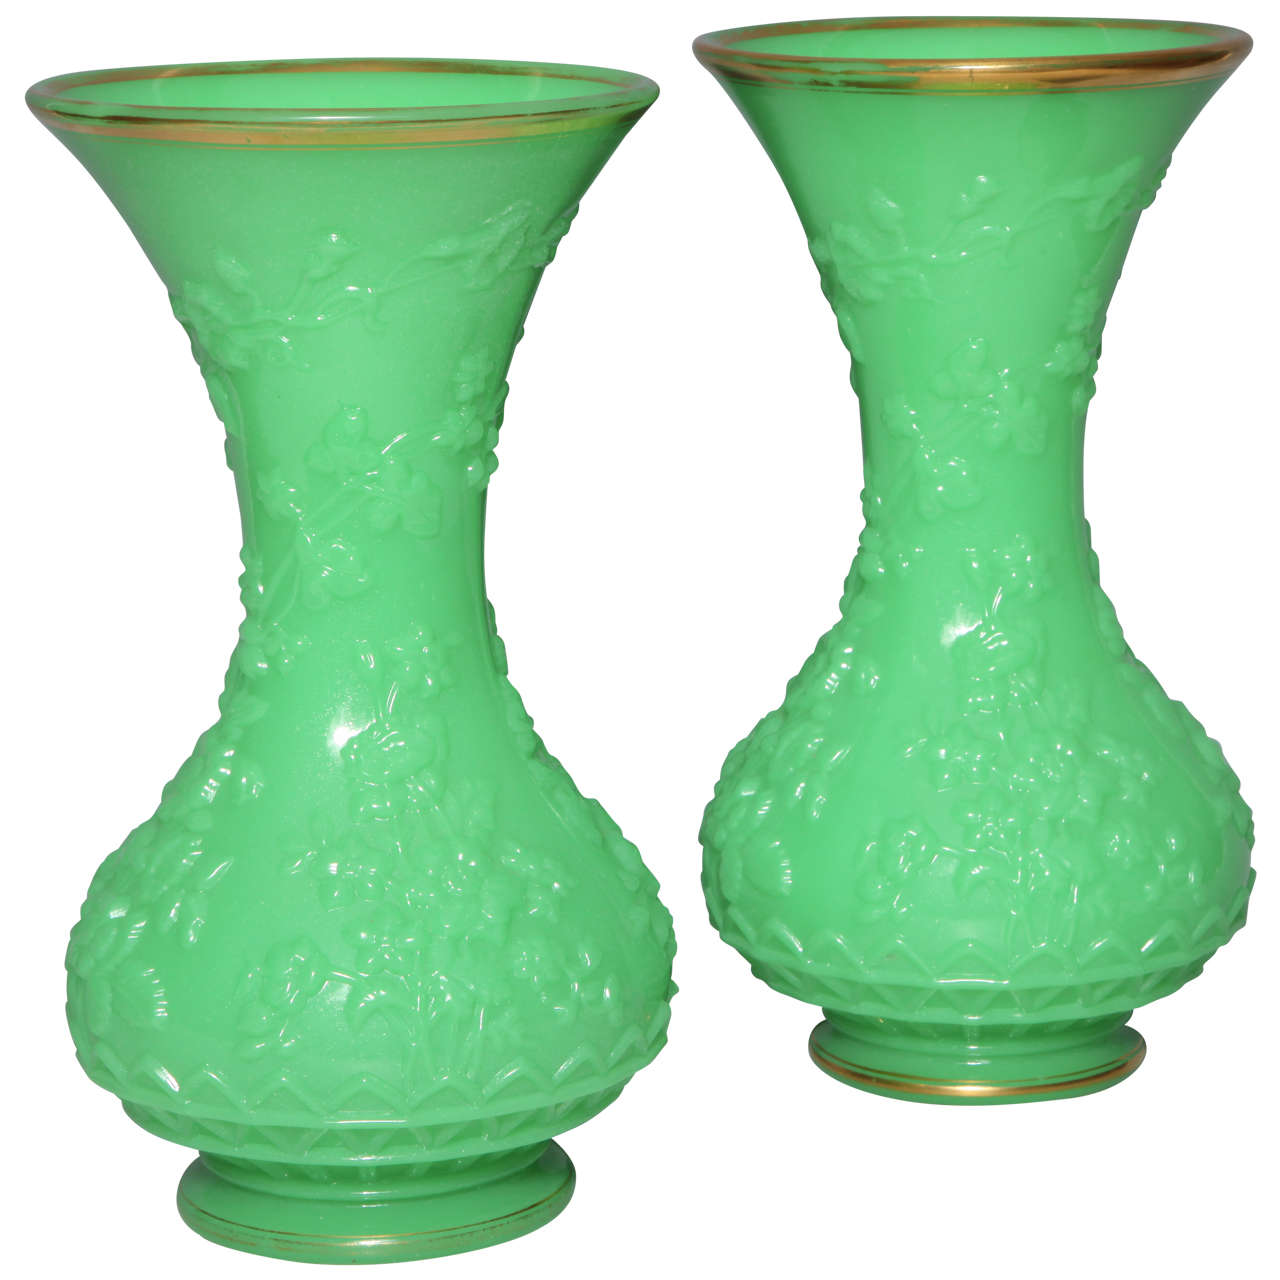 Pair of French Baluster Shaped Opaline Glass Vases Attributed to "Baccarat" For Sale